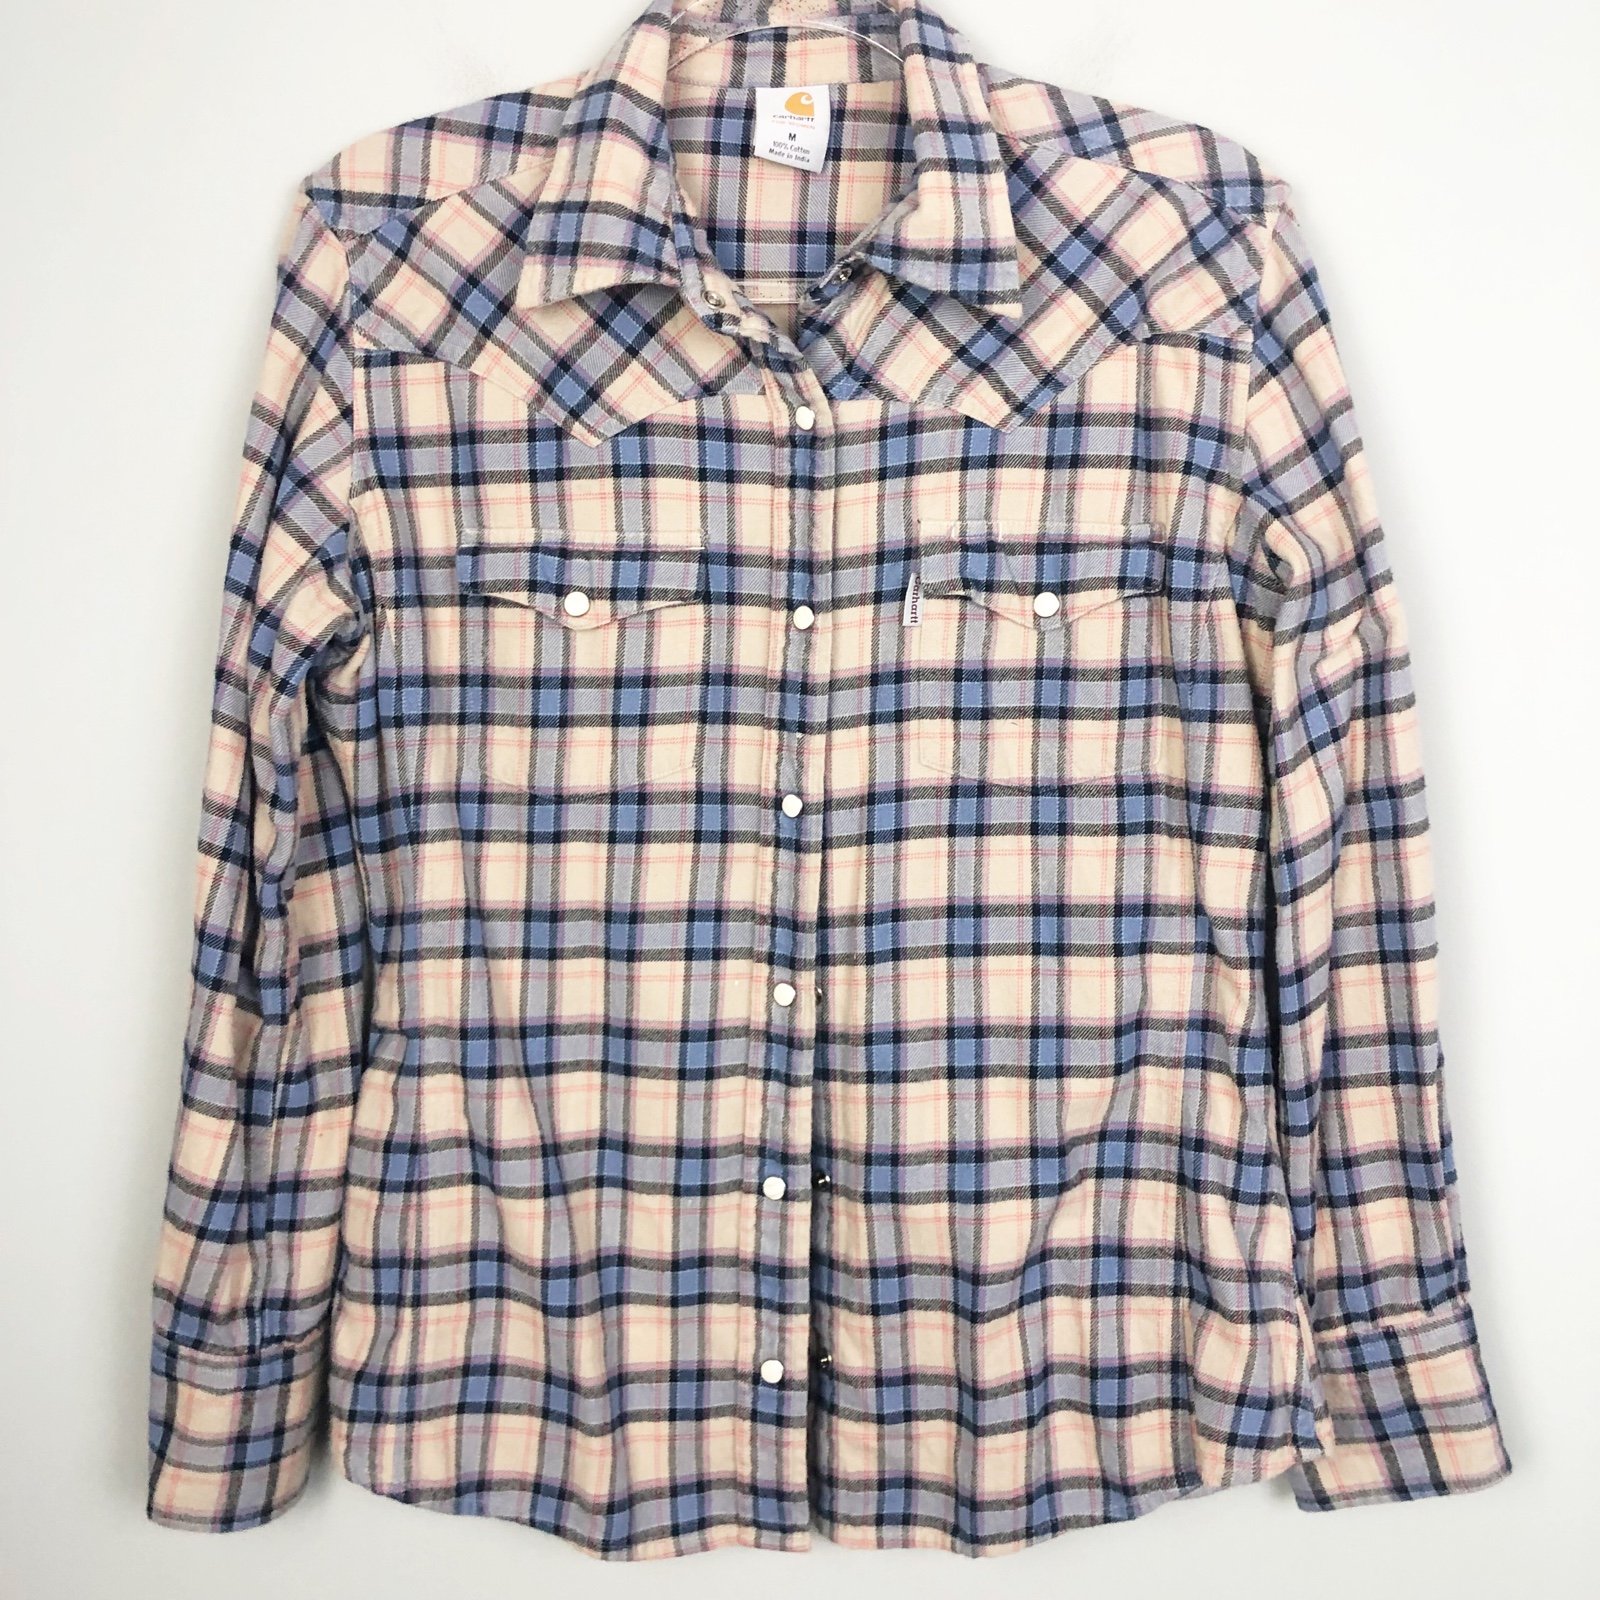 Simple CARHARTT | Tan & Blue Snap Front Plaid Flannel Long Sleeve Top Women’s Size M km1iQZyqg hot sale